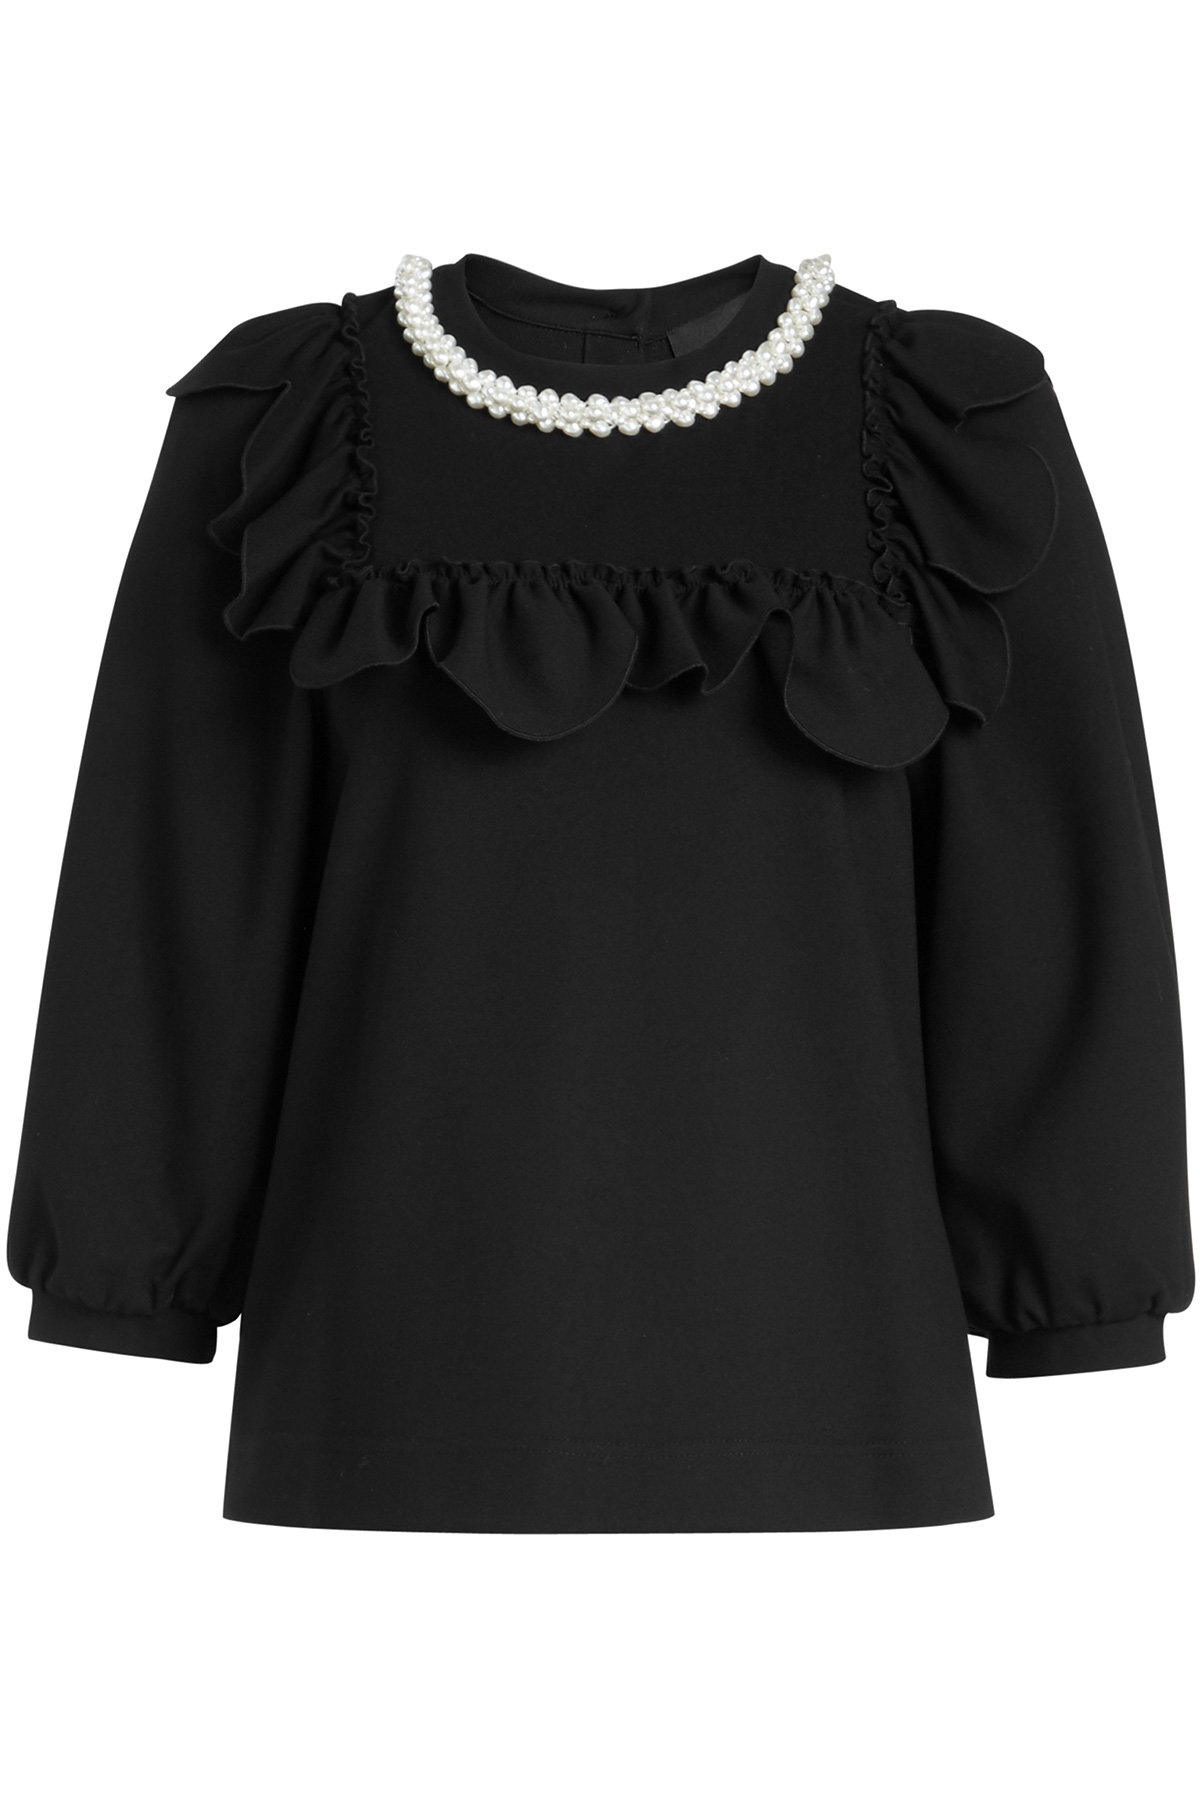 Simone Rocha - Pullover with Pearl-Embellished Neckline